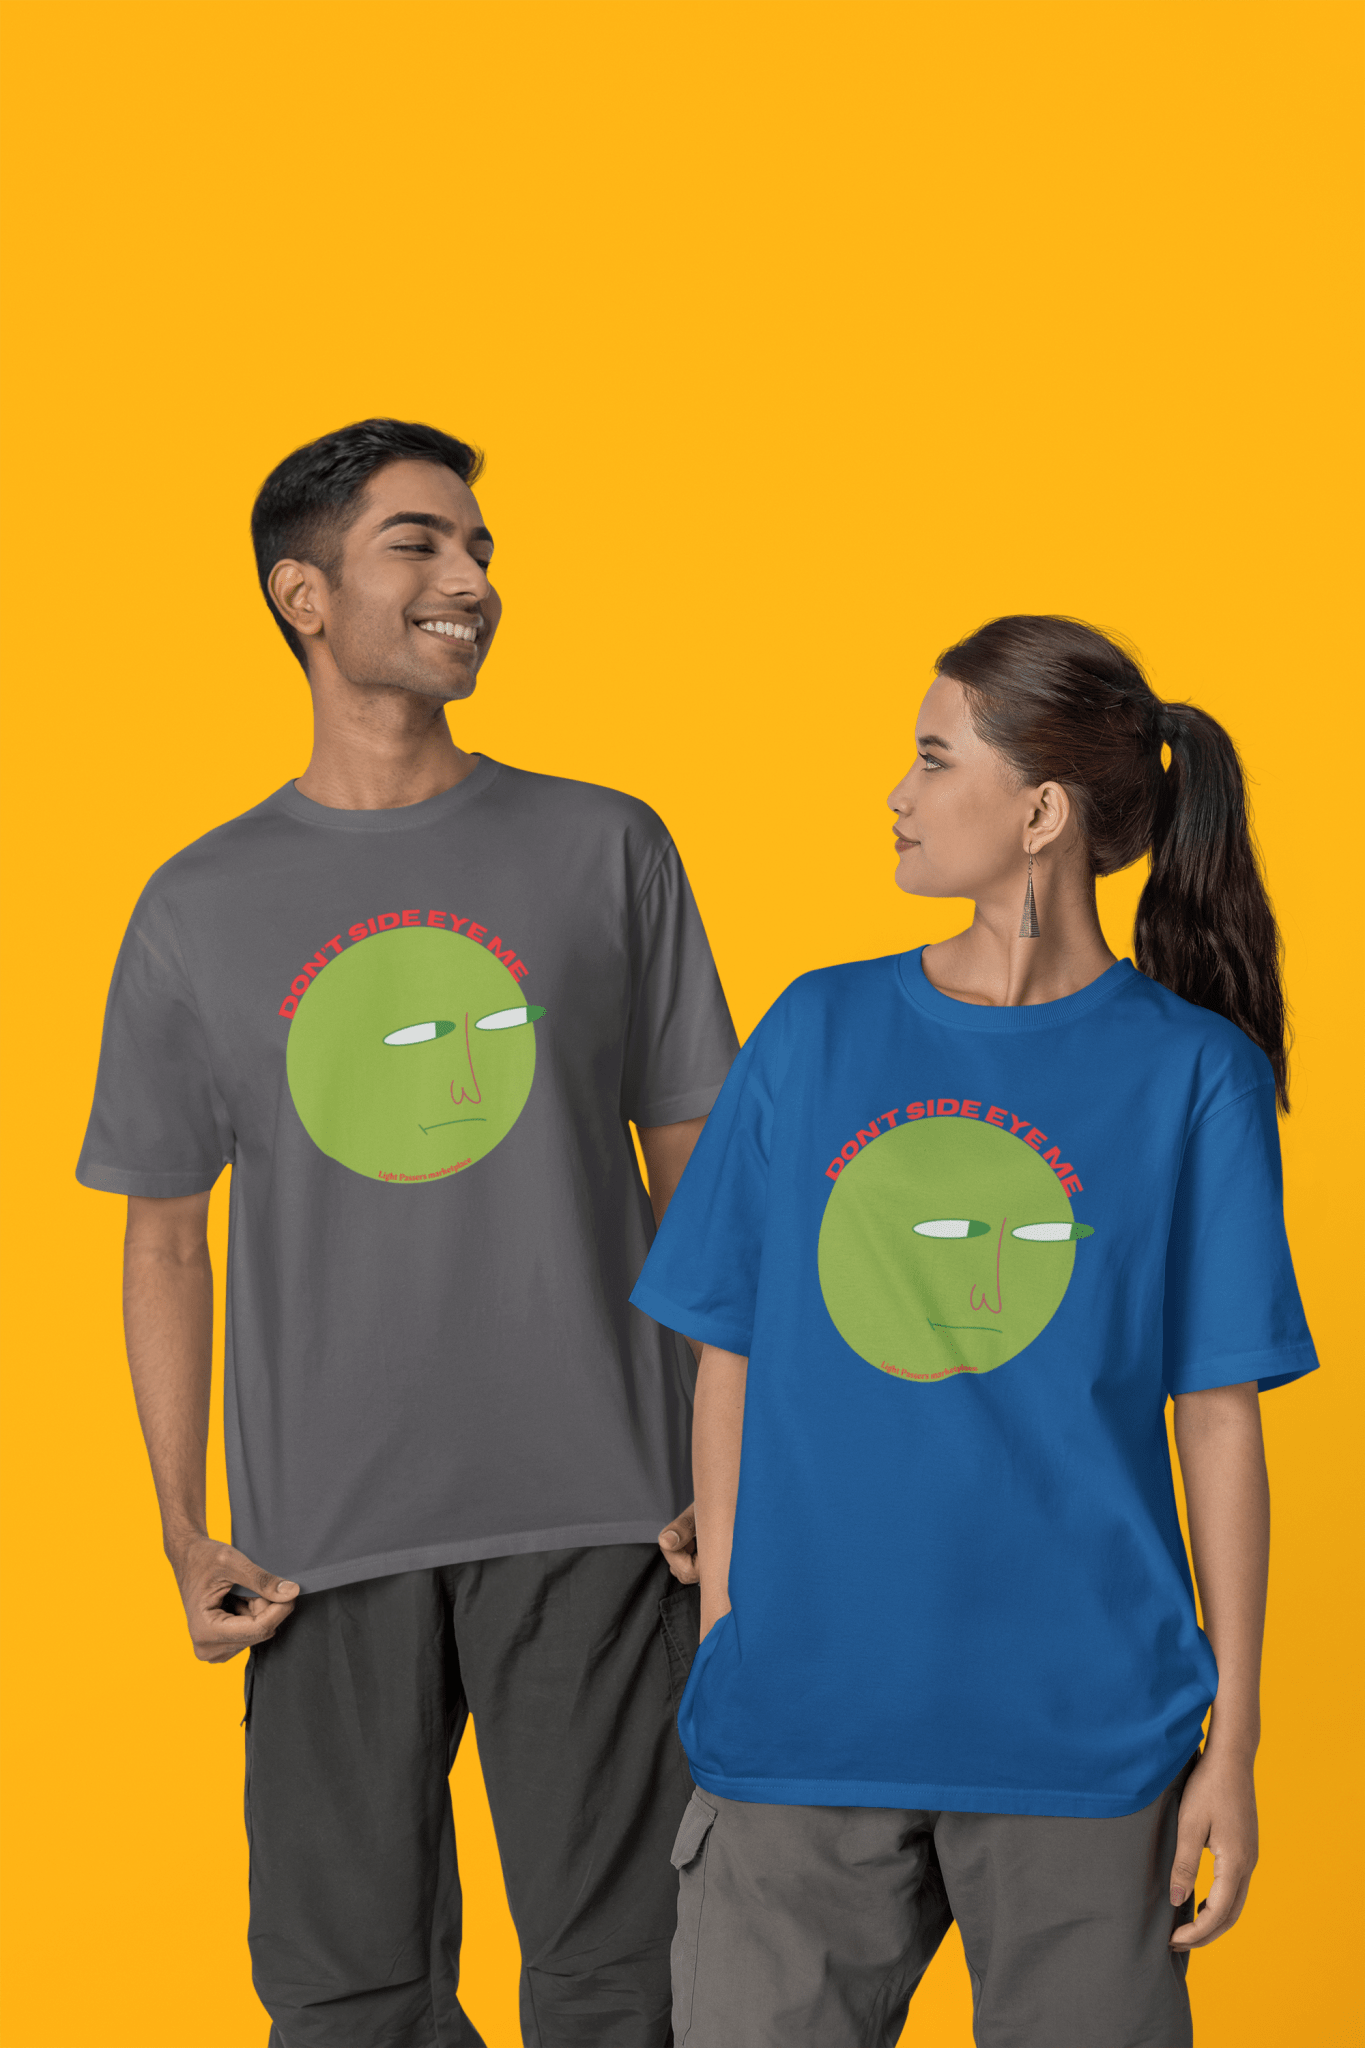 A man and woman in matching shirts, smiling. Unisex soft-style t-shirt in 100% cotton, no side seams, ribbed collar. Lightweight, versatile fit for all occasions. Made ethically with US cotton.